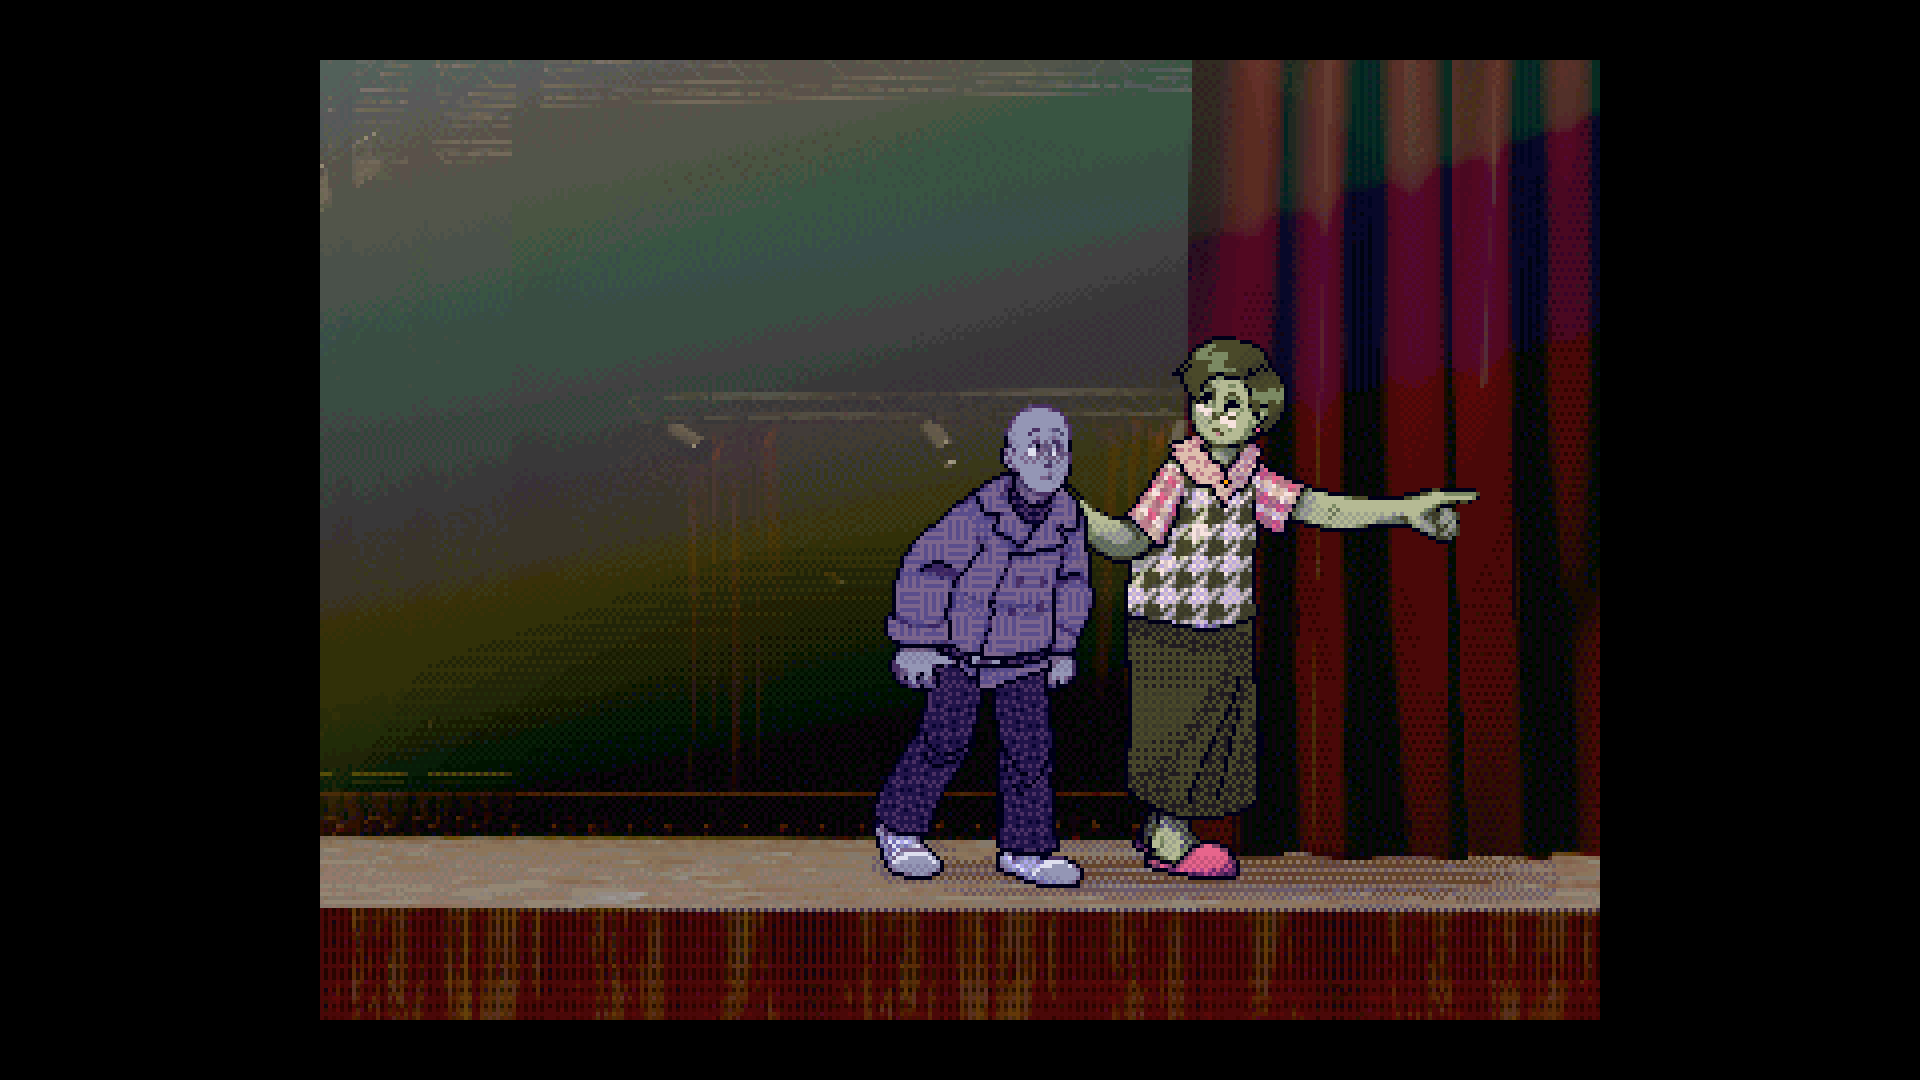 An Outcry screenshot of the characters exiting stage left